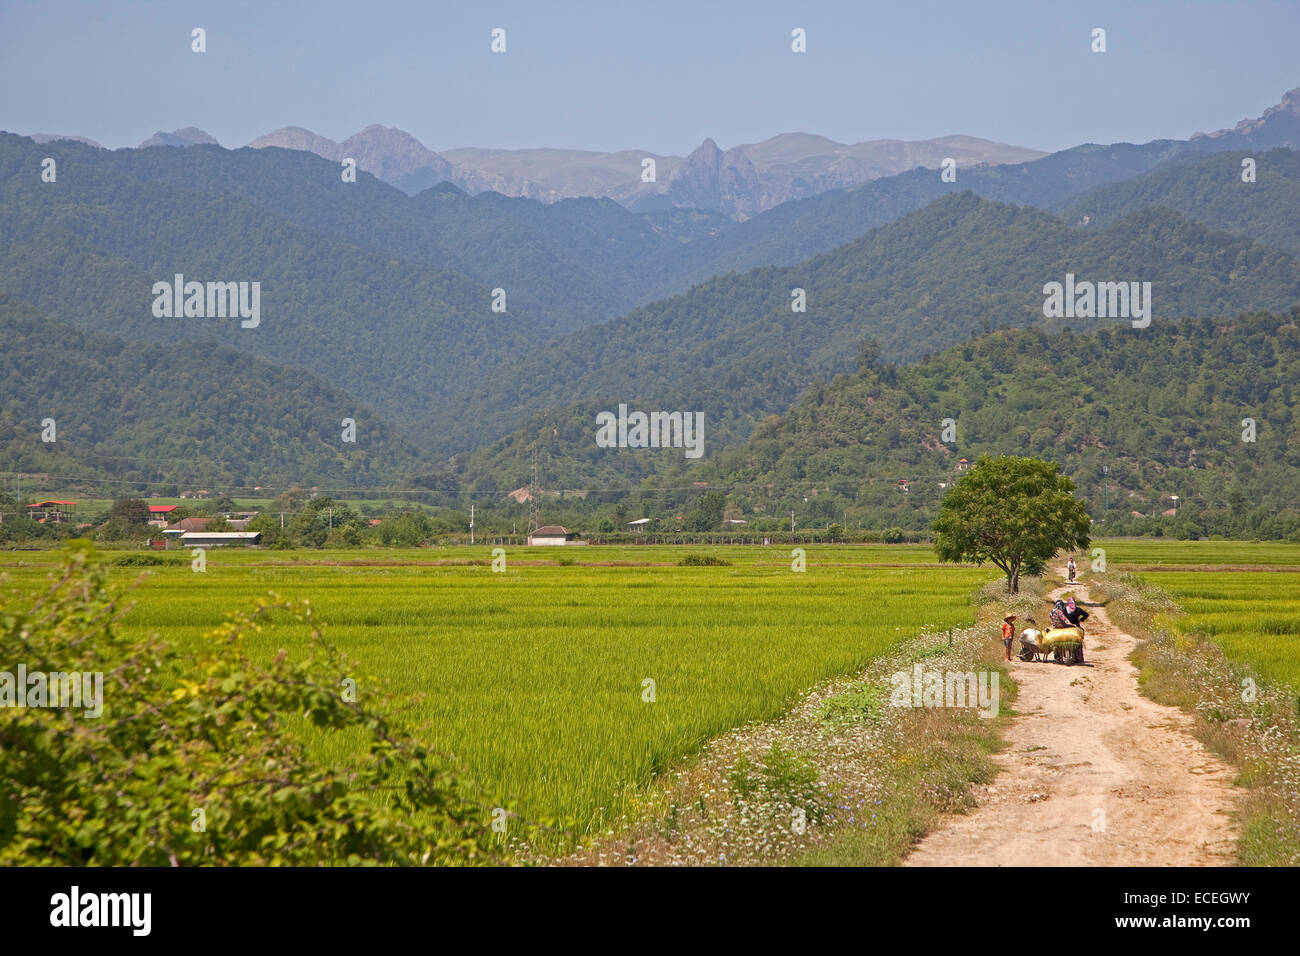 Countryside showing rice fields and coastal mountains near Ardabil, Iran Stock Photo